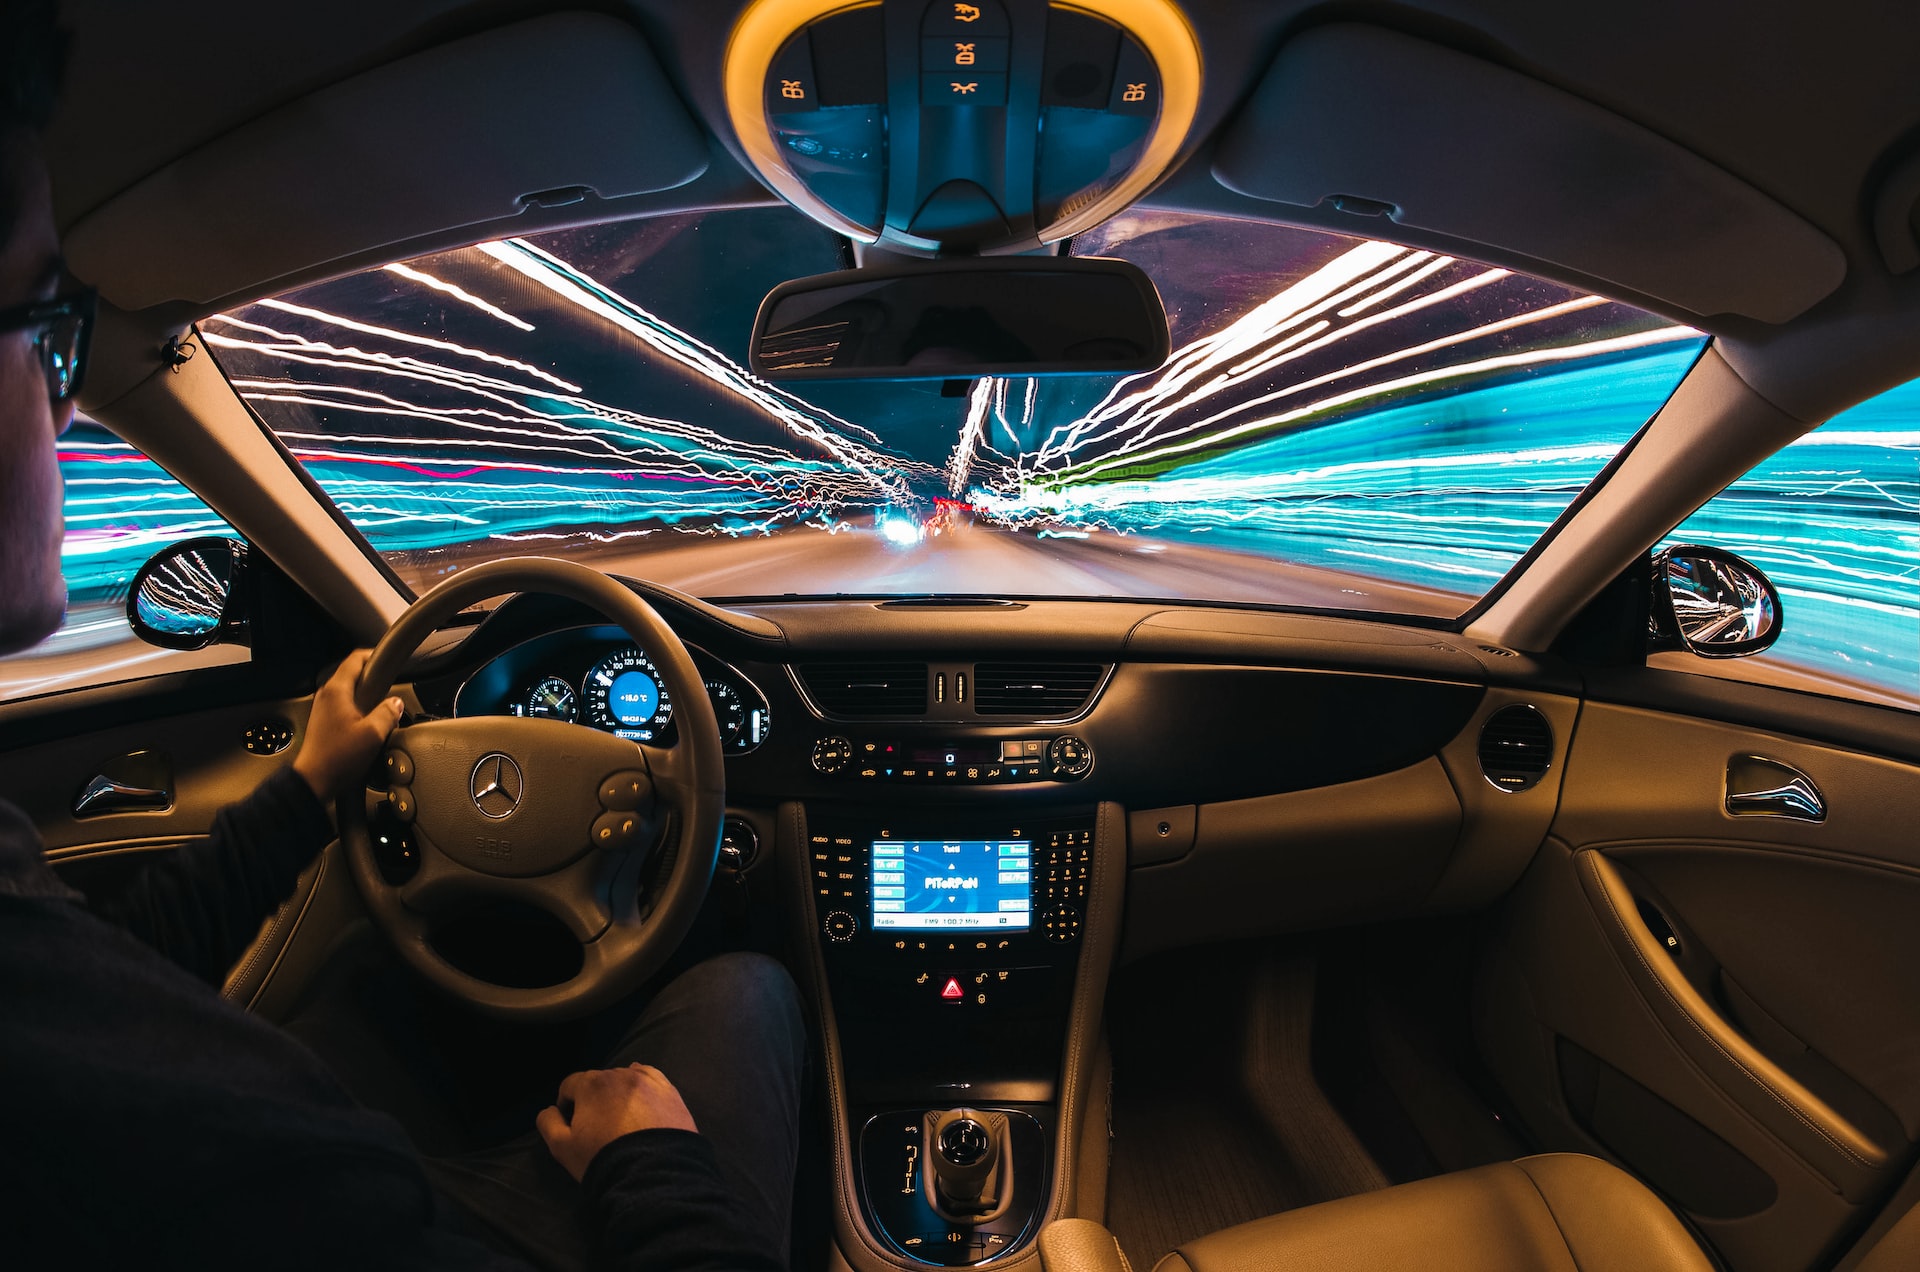 The Future of Self-Driving Cars and the Automotive Industry